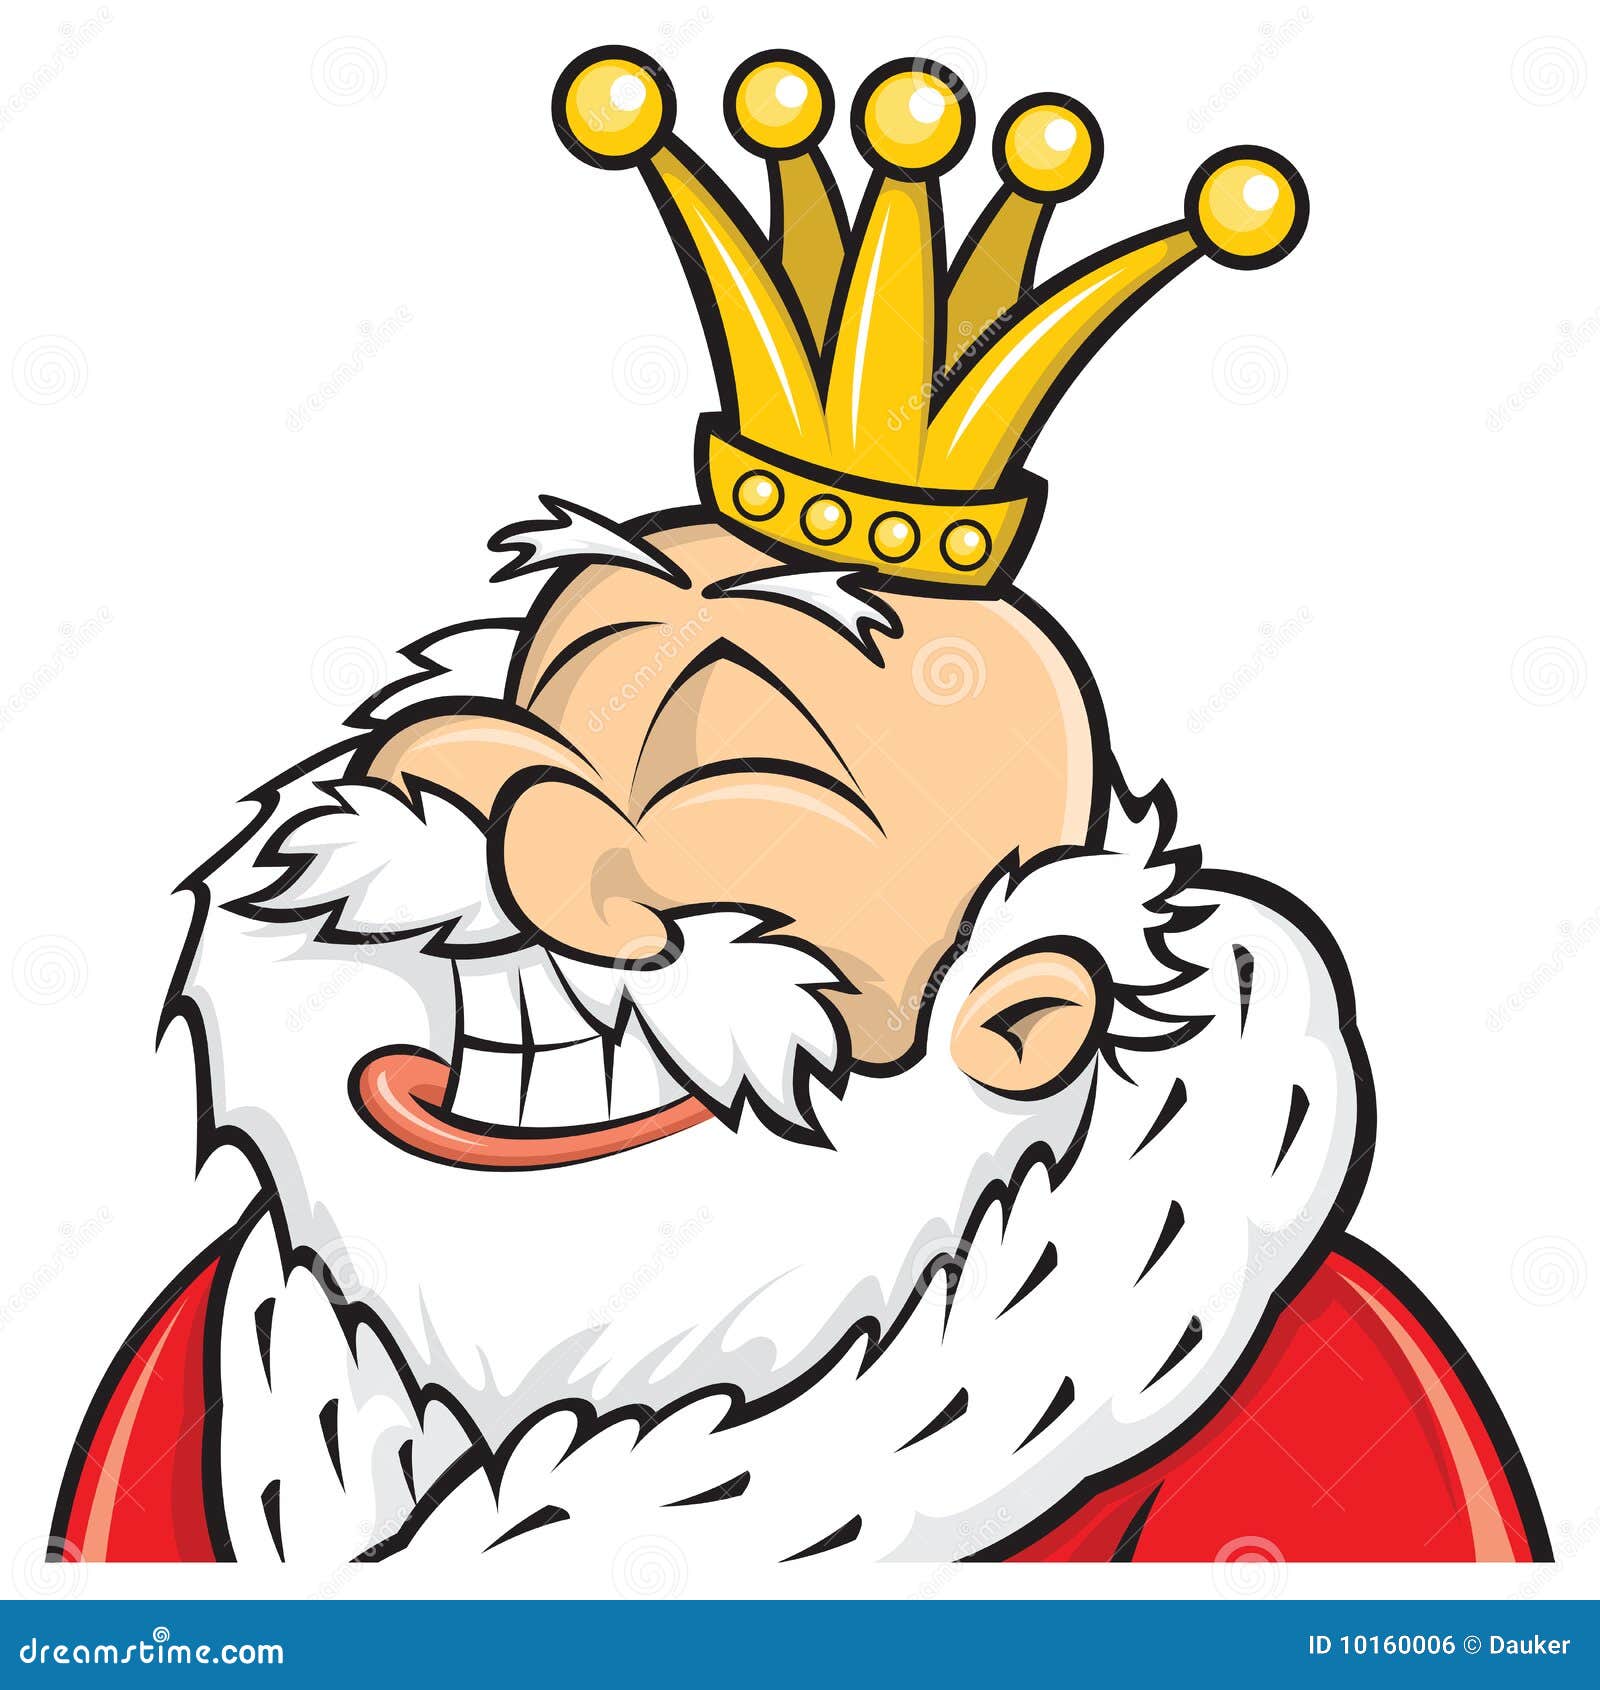 clip art for king - photo #46